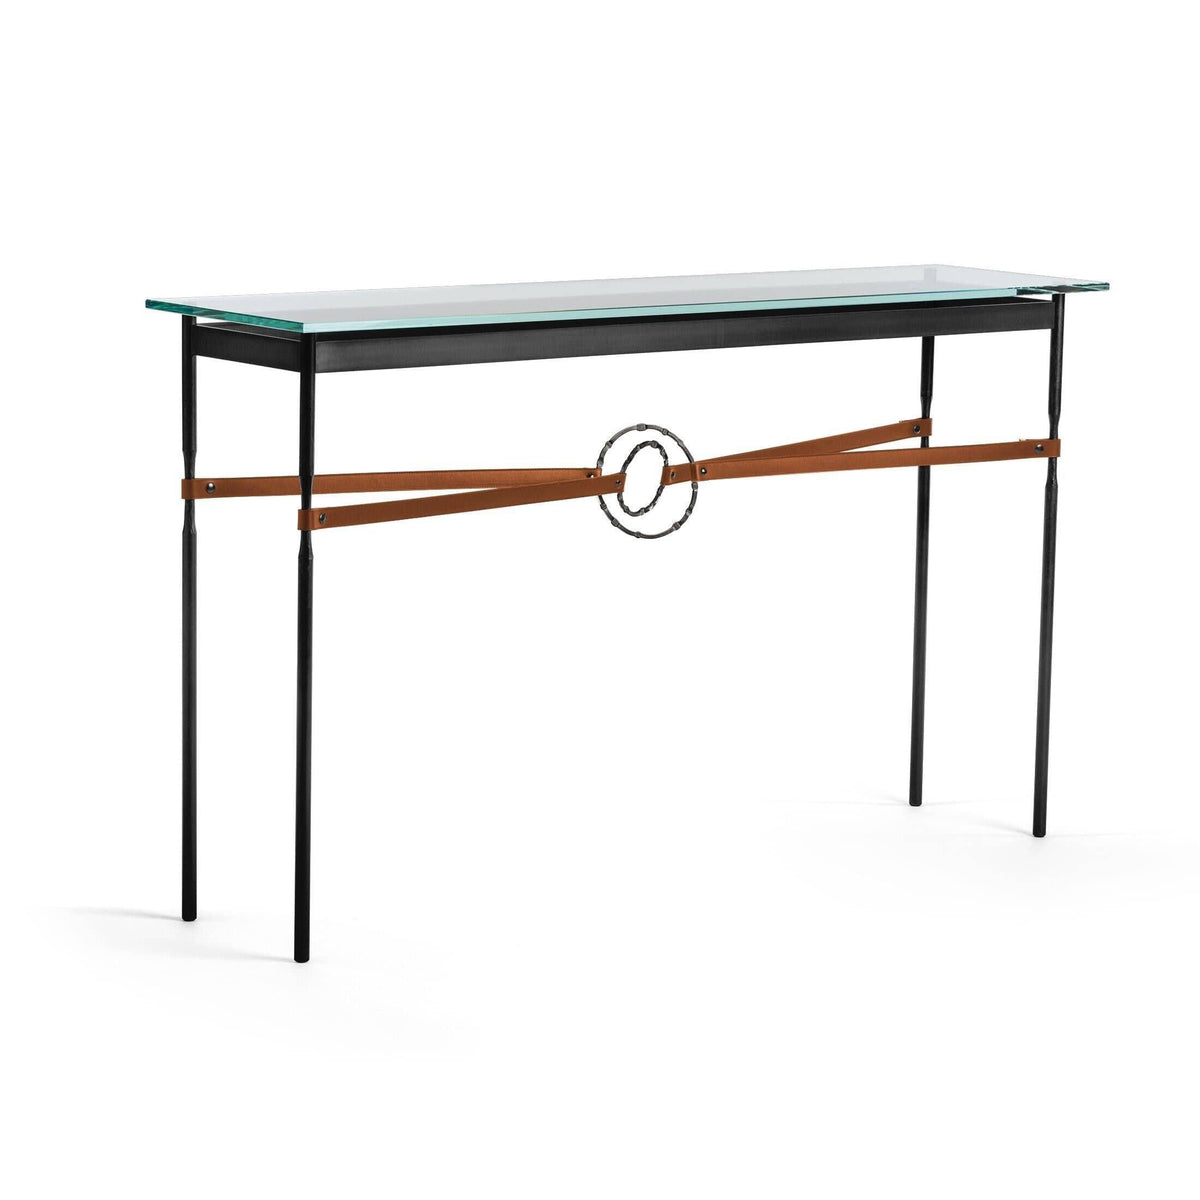 Hubbardton Forge - Equus Chestnut Leather Console Table - 750118-10-07-LC-VA0714 | Montreal Lighting & Hardware